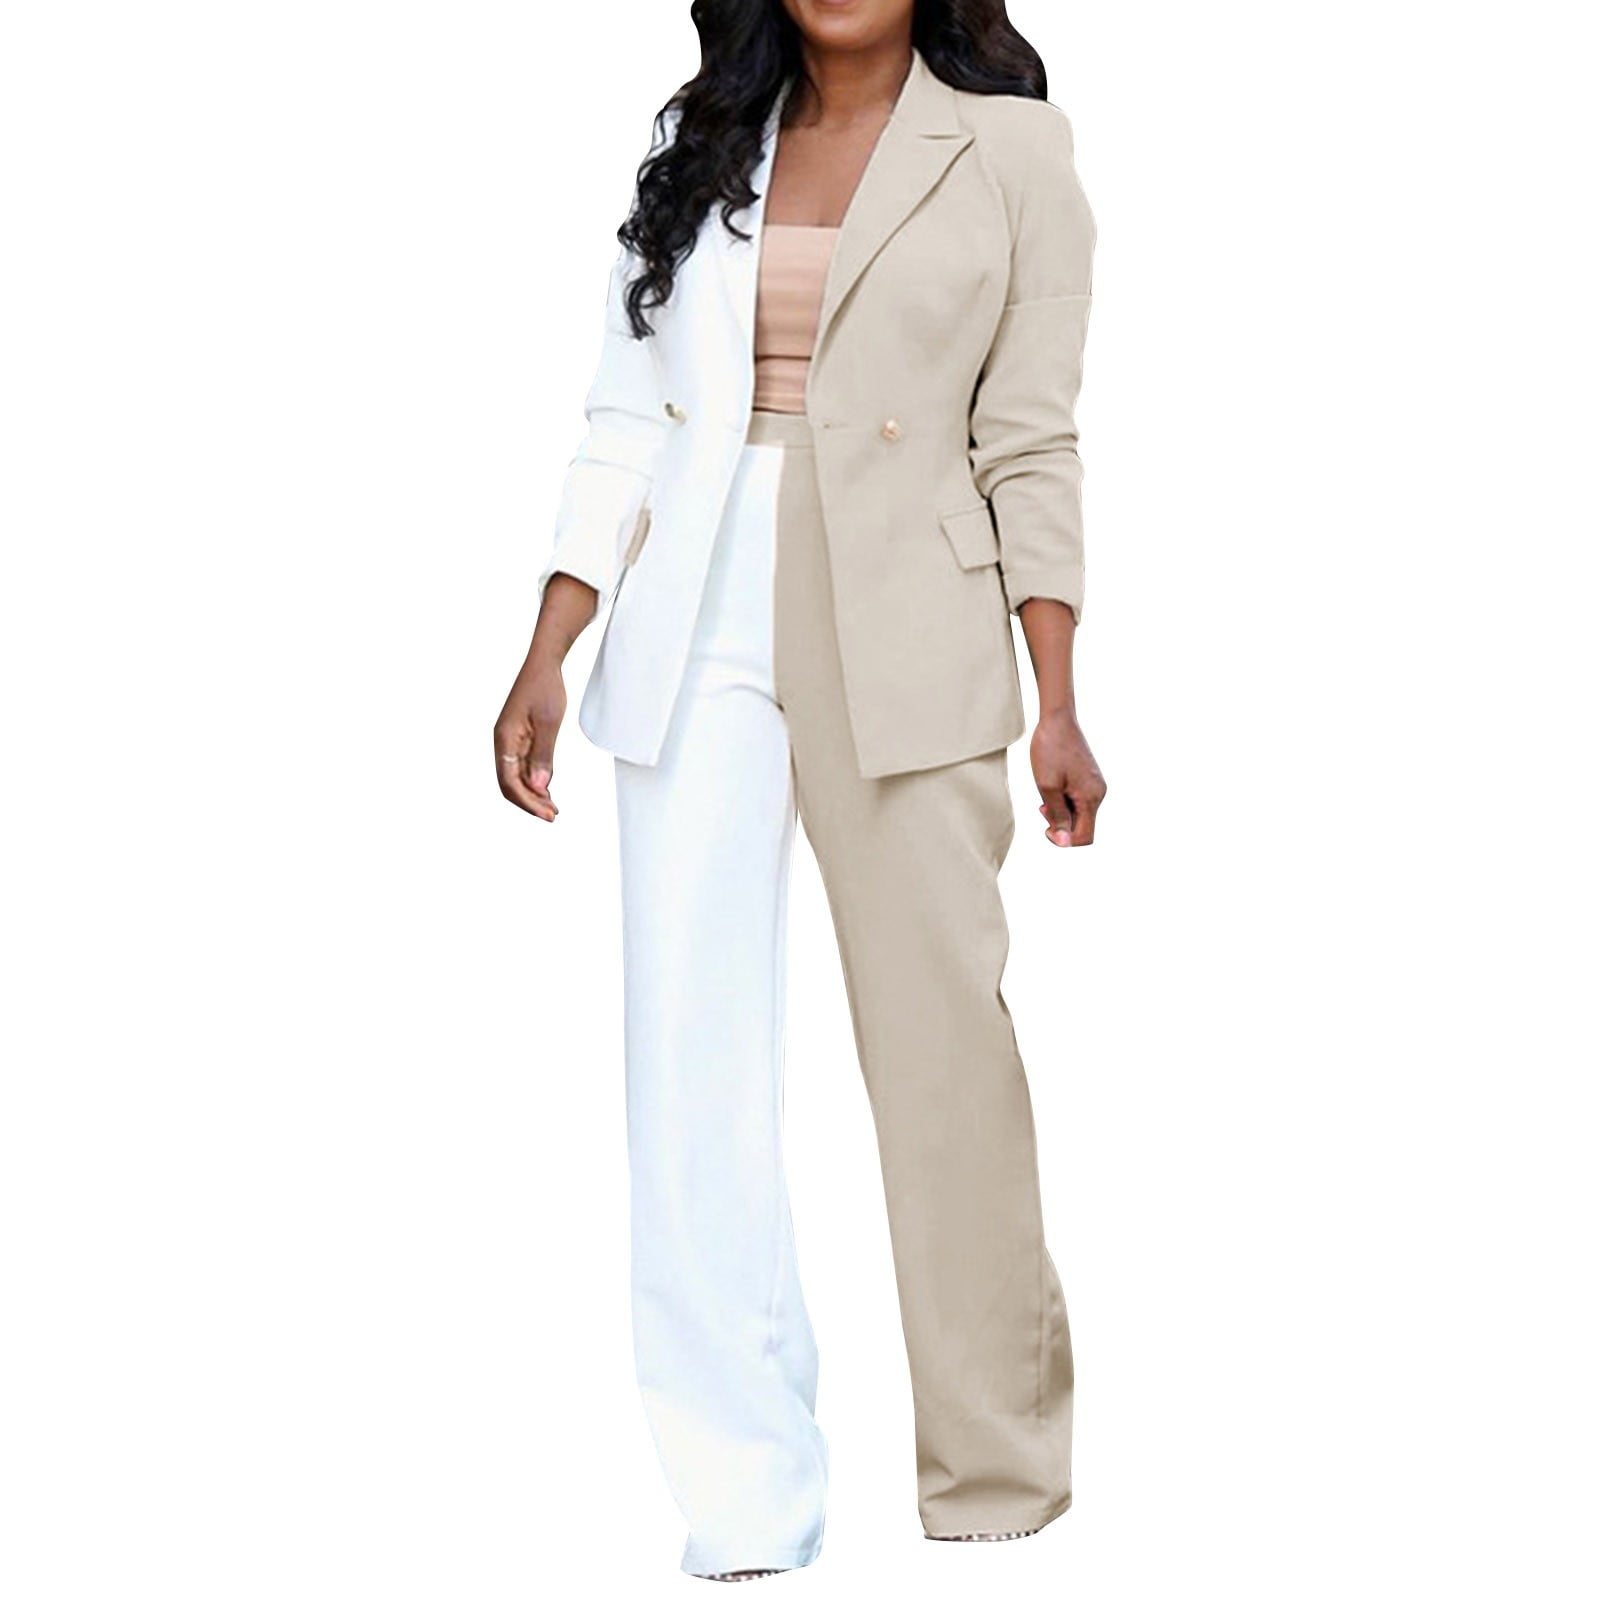 NKOOGH Dressy Wedding Pant Suits Two Piece for Women Pants Suit Women  Fashion Casual Clothes Long Sleeve Assorted Colors Blazer High Waist Suit  Pencil